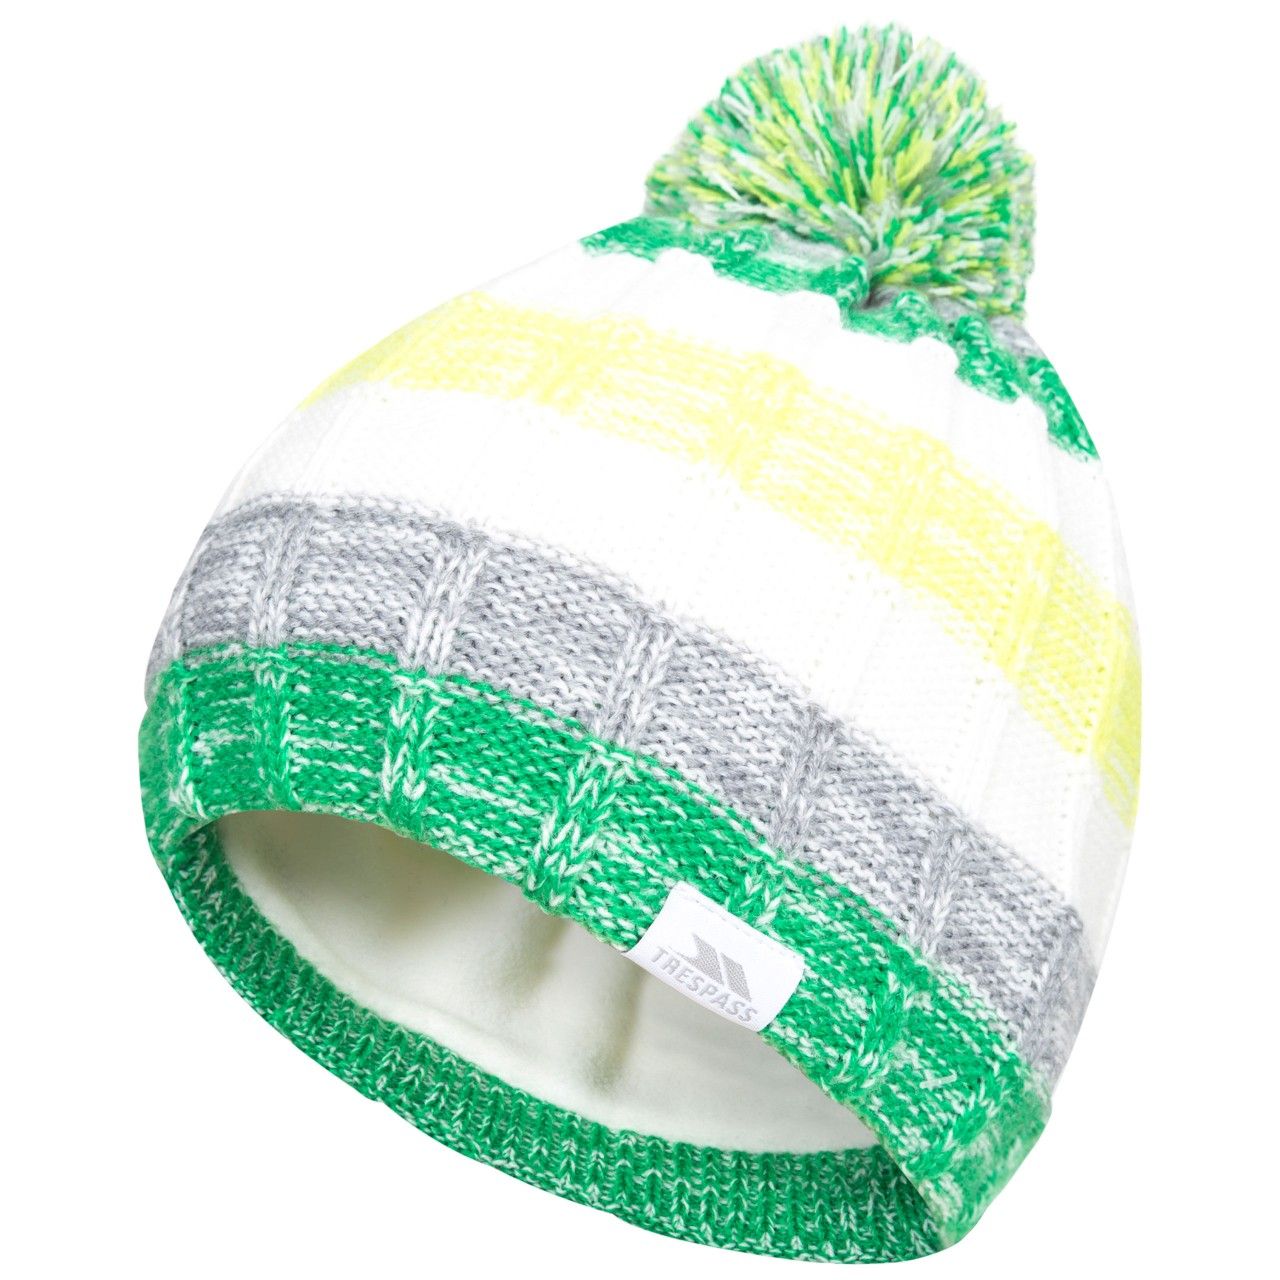 Knitted hat with pom pom. Fully fleece lined. Woven label. Outer: 100% Acrylic, Lining: 100% Polyester Anti pil fleece.